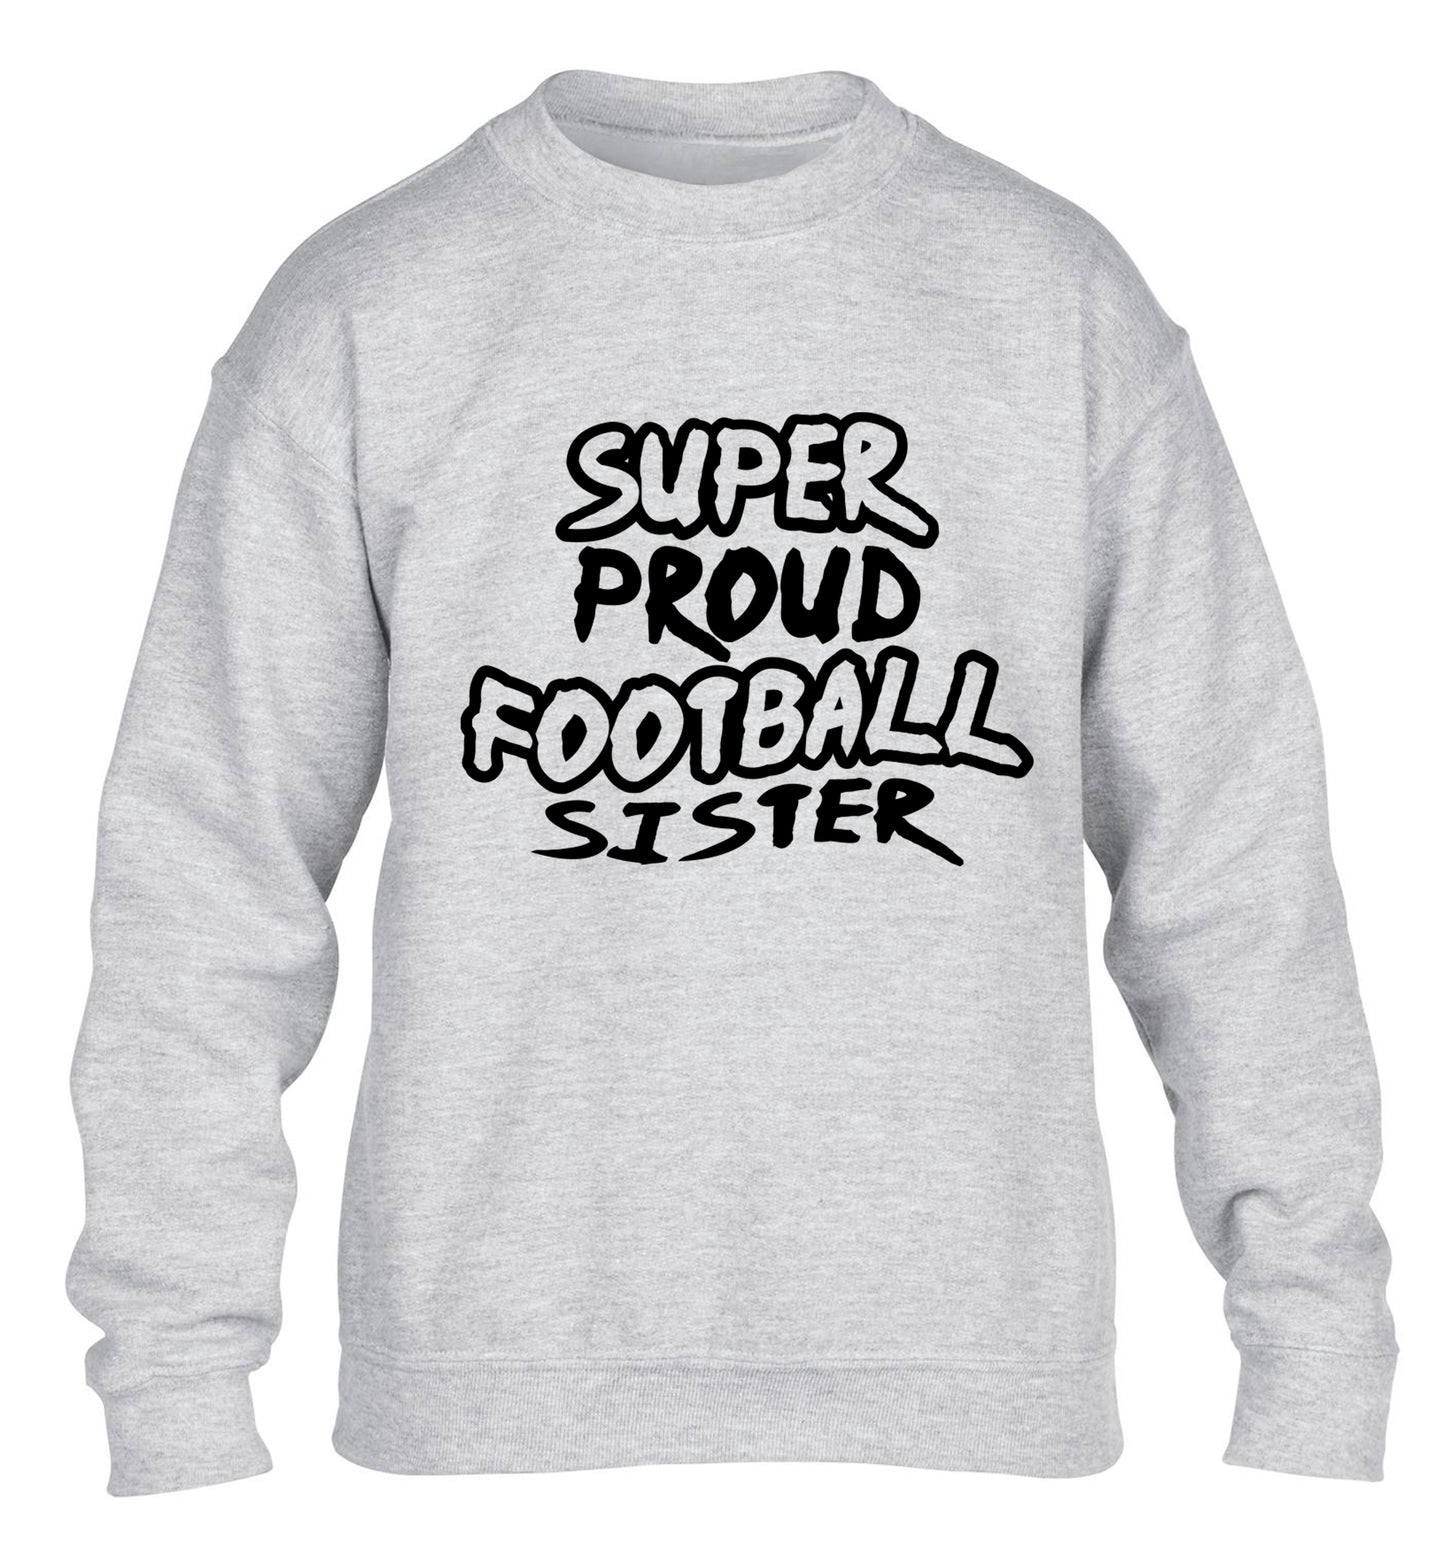 Super proud football sister children's grey sweater 12-14 Years